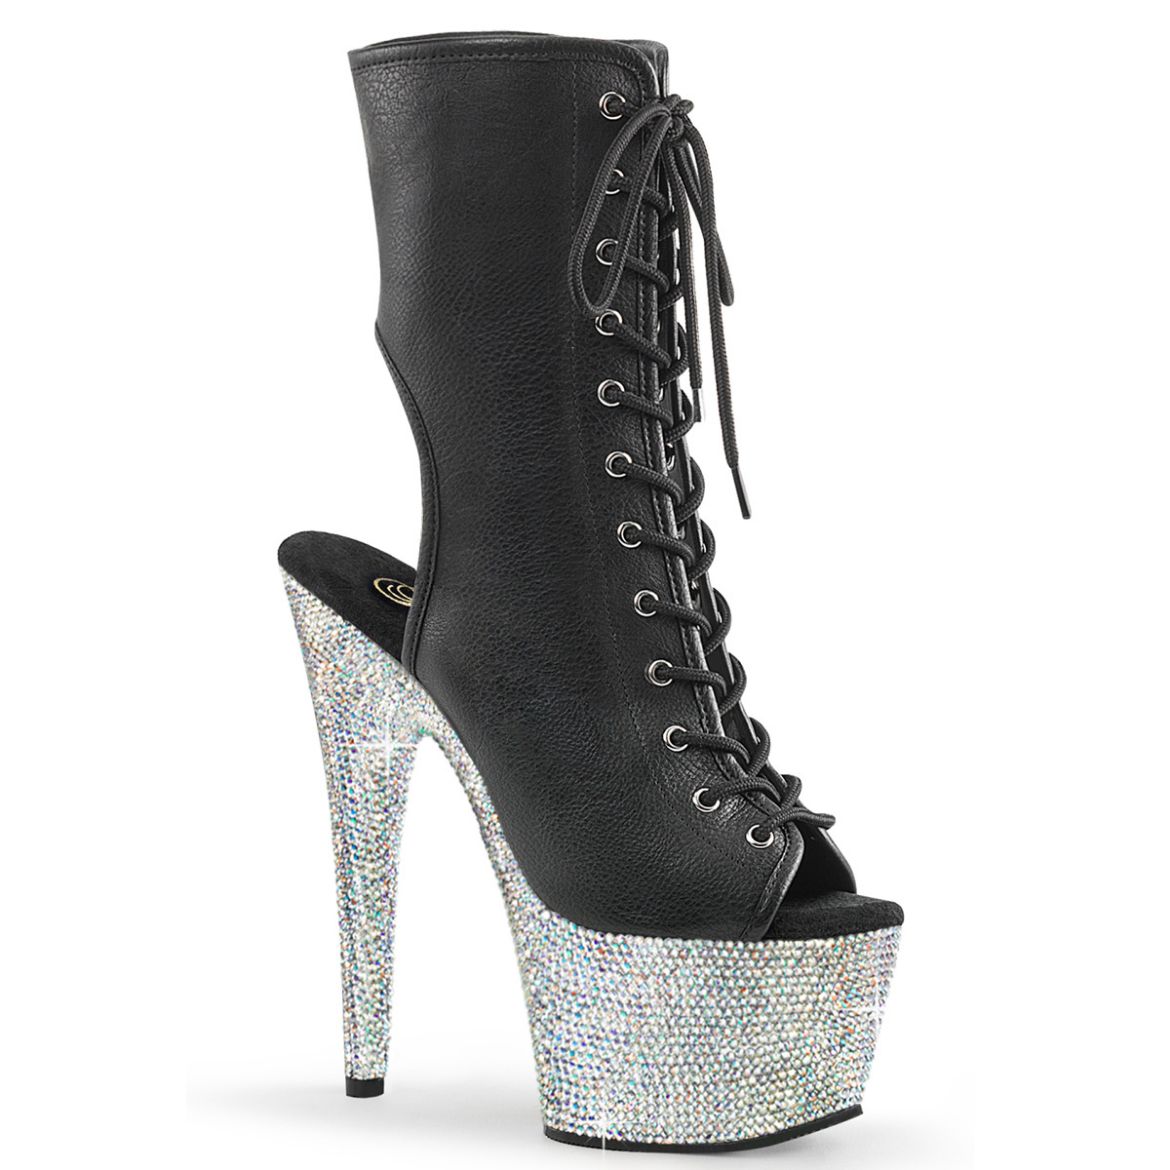 Product image of Pleaser BEJEWELED-1016-7 Blk Faux Leather/Slv AB RS 7 Inch Heel 2 3/4 Inch PF Open Toe/Heel Lace-Up Ankle Boot wRS